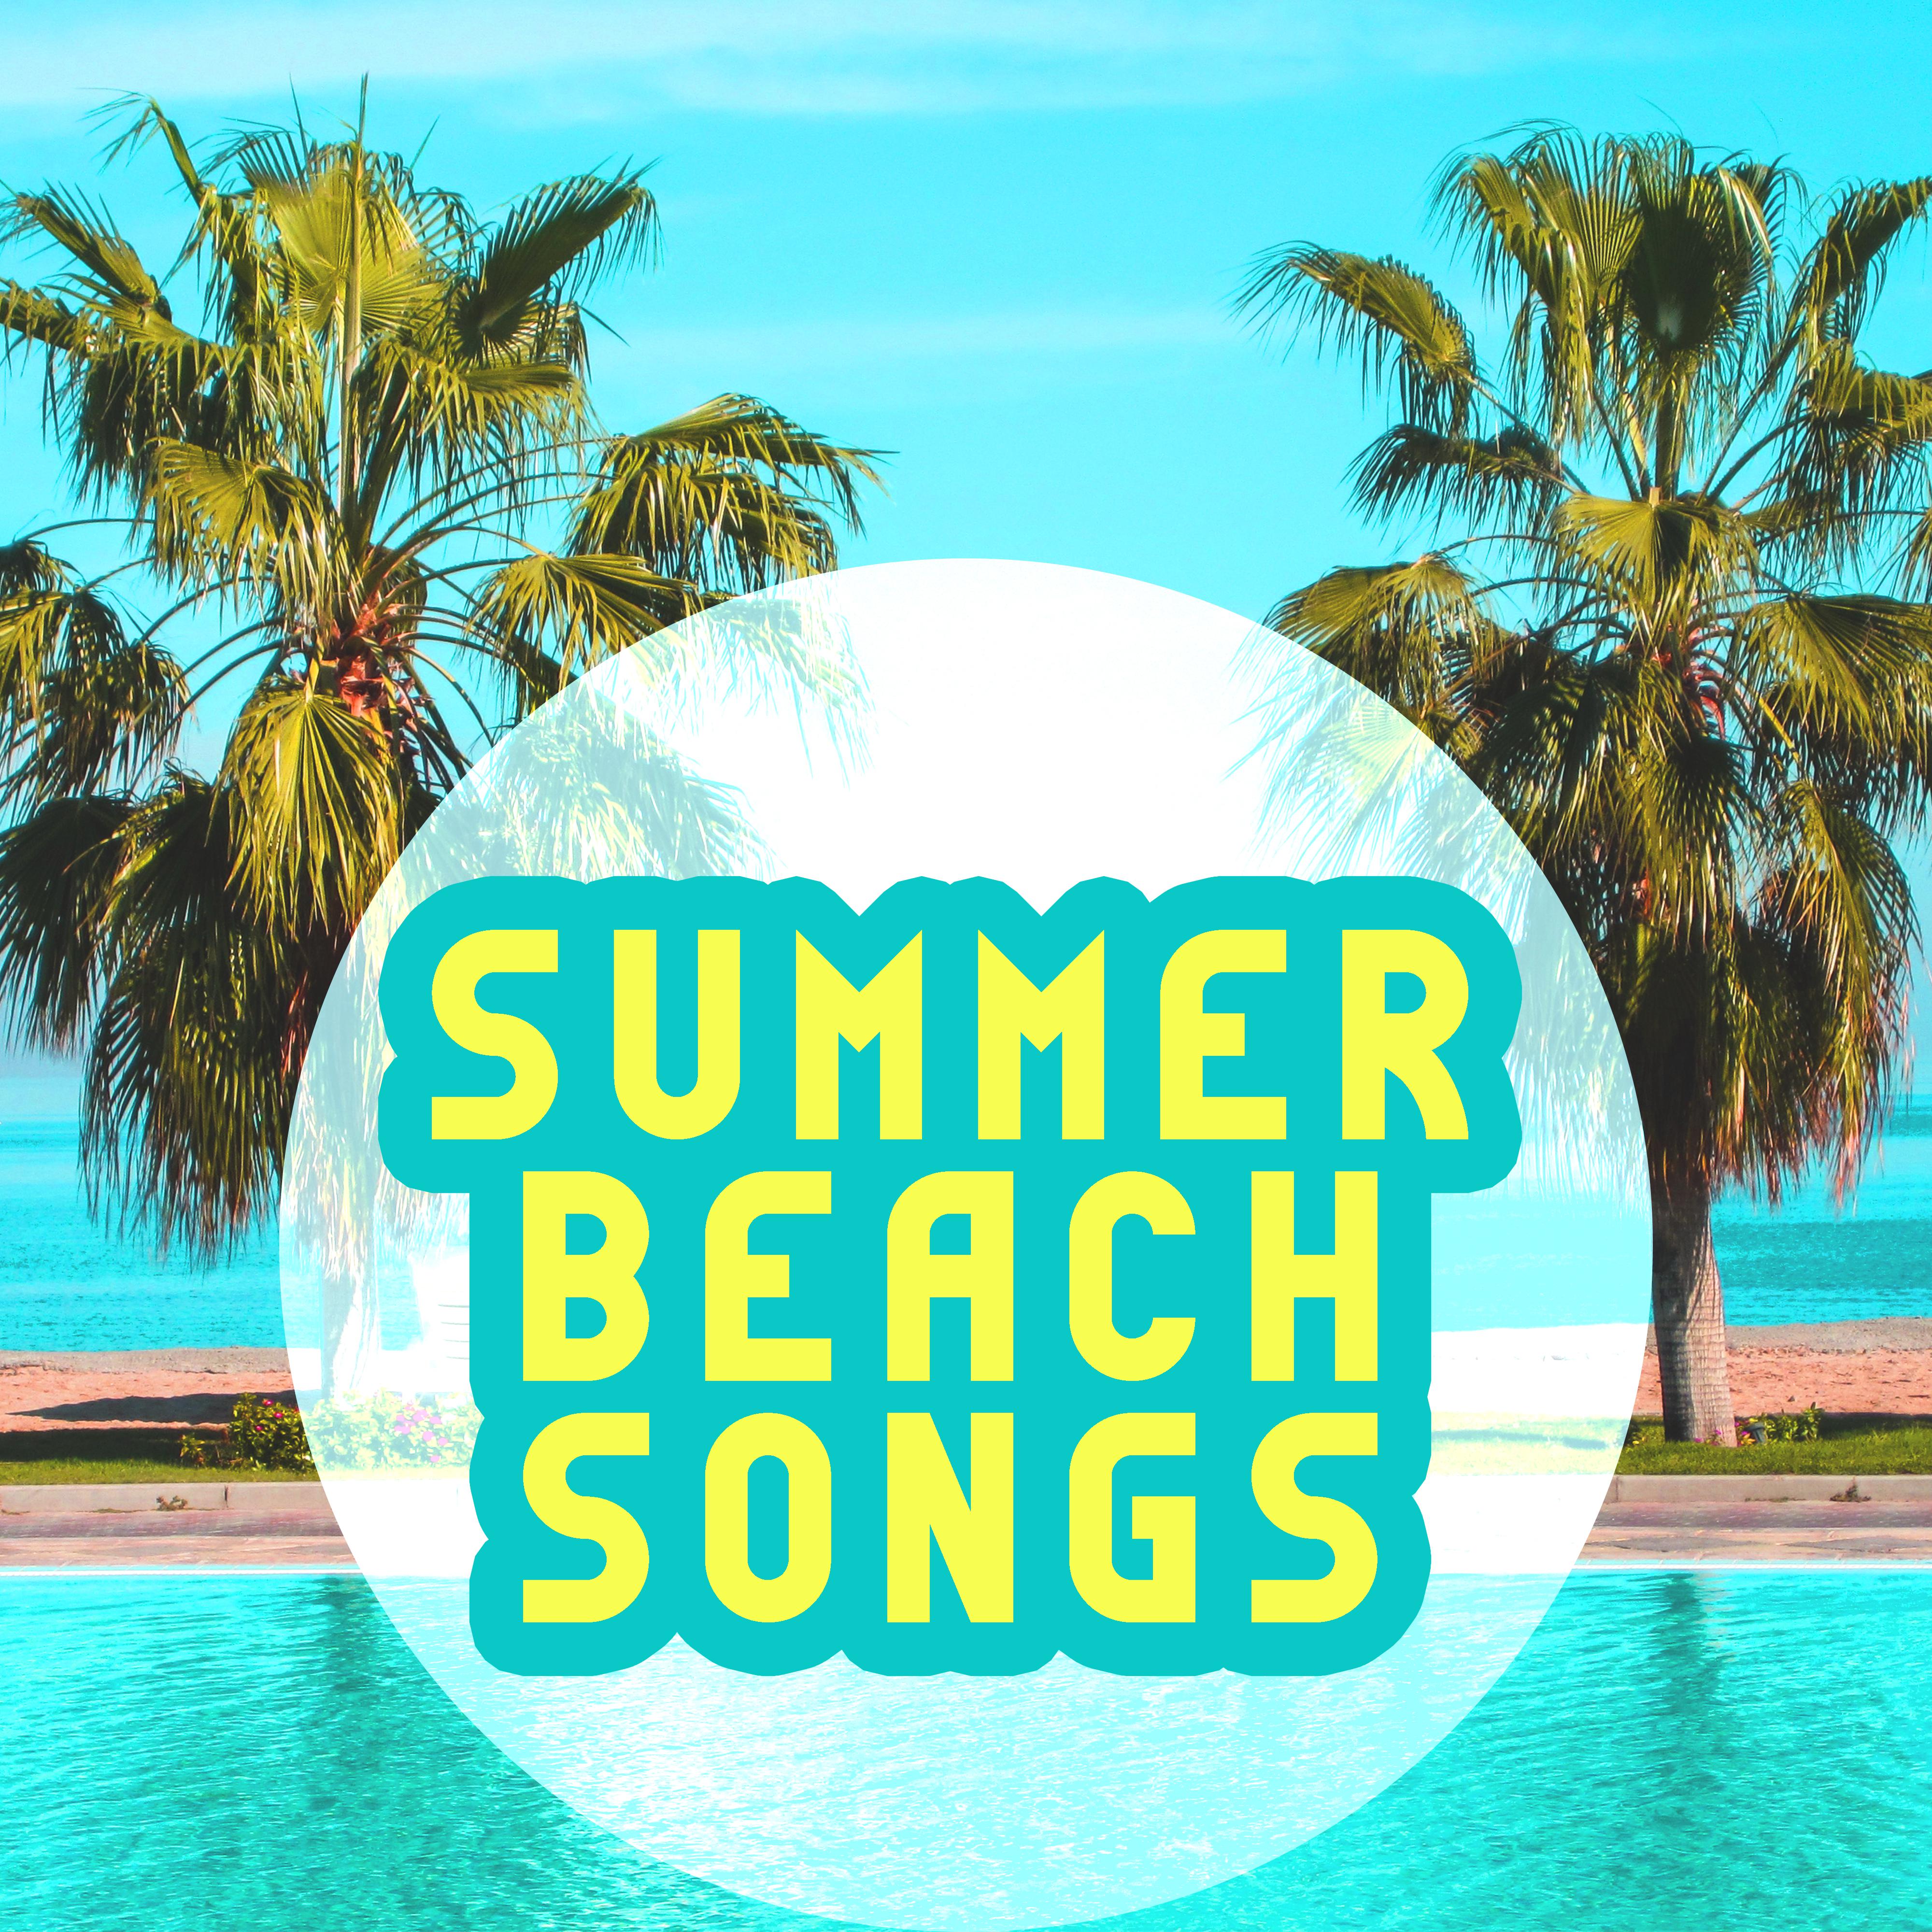 Summer Beach Songs – Relaxing Ibiza Music, Sounds to Rest, Chill Out Melodies, Holiday Vibes